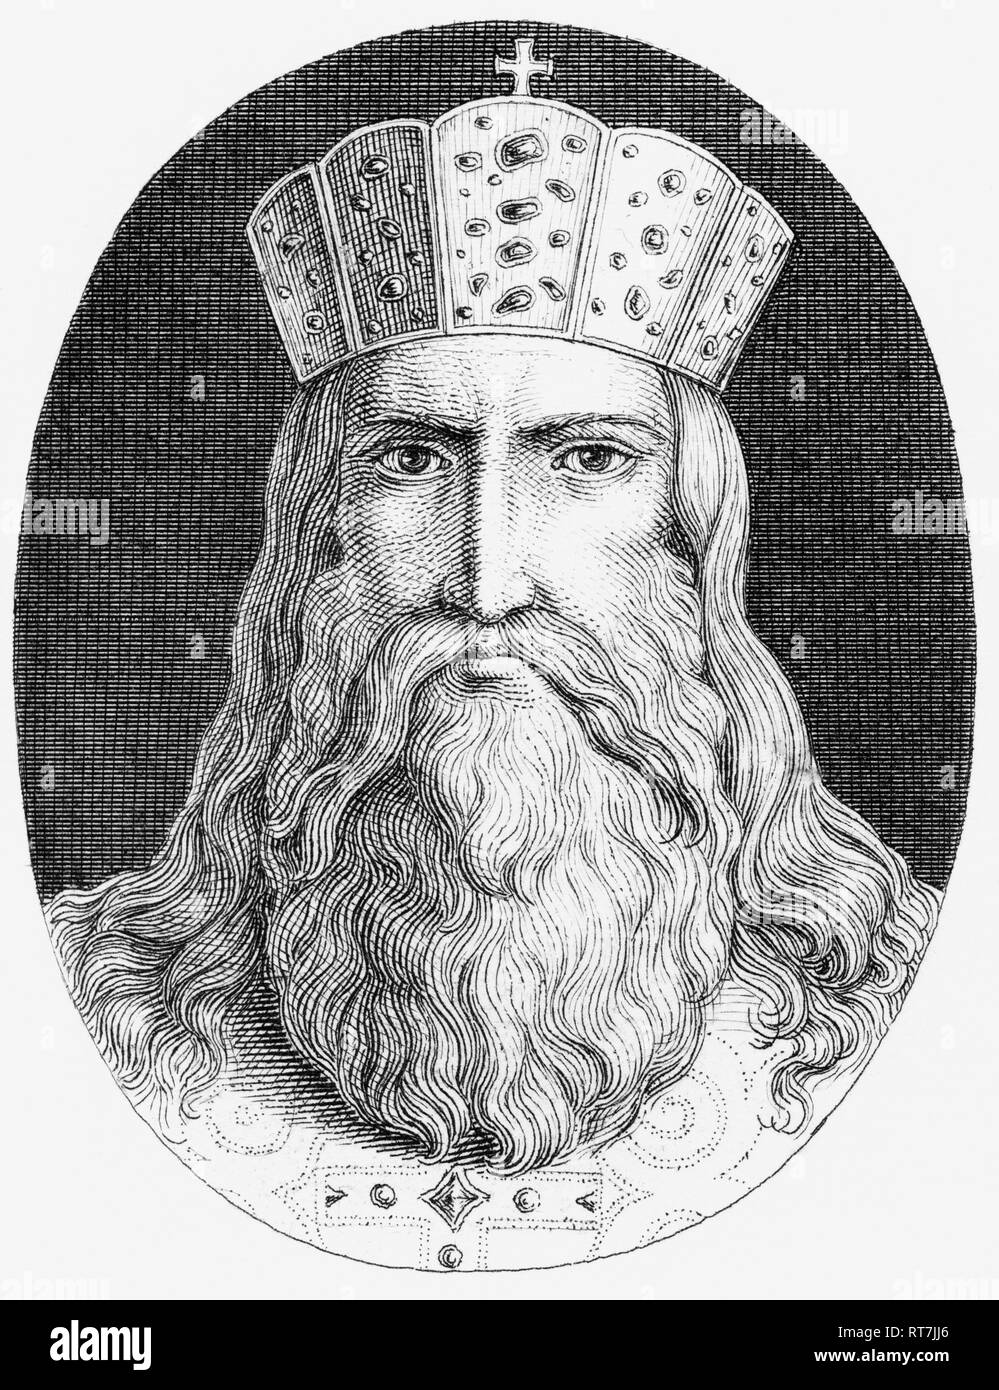 Charlemagne / Charles the Great, king of Franks, from the family of the Carolingians, copperplate engraving from about 1840th., Artist's Copyright has not to be cleared Stock Photo